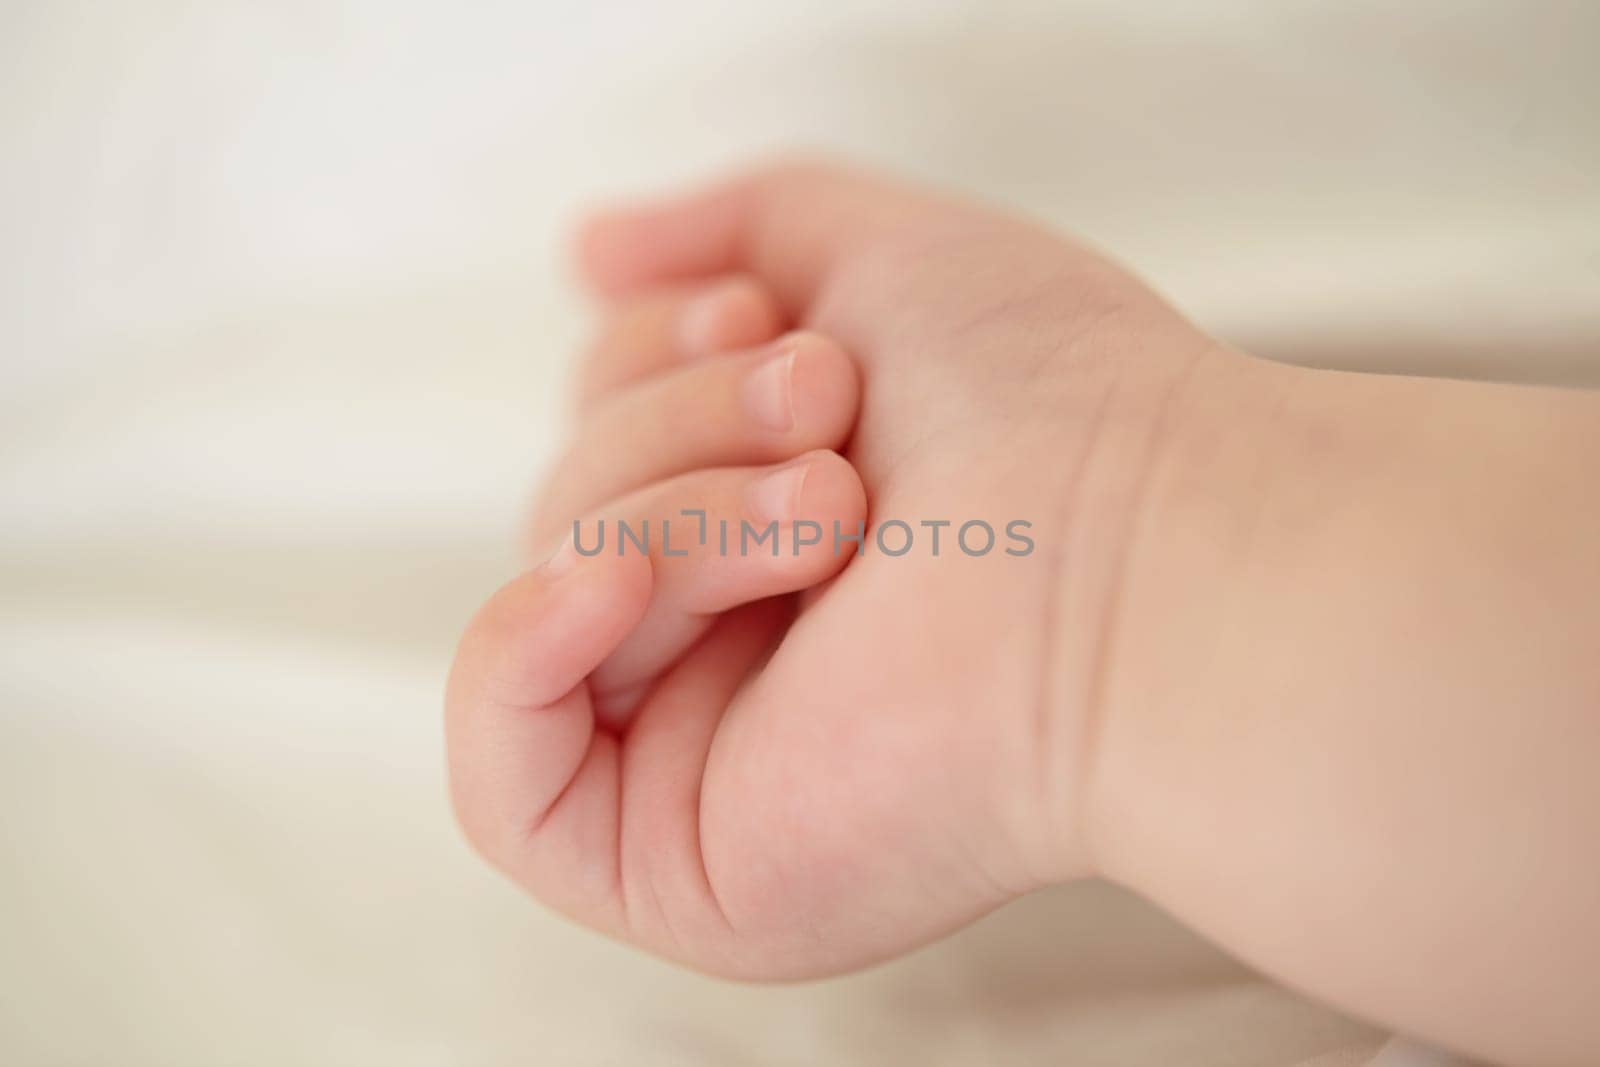 Relax, development and the hand of a baby closeup in a nursery or bedroom of a home for rest at bedtime. Kids, sleeping or wellness with the fist and fingers of a newborn infant child lying on a bed.